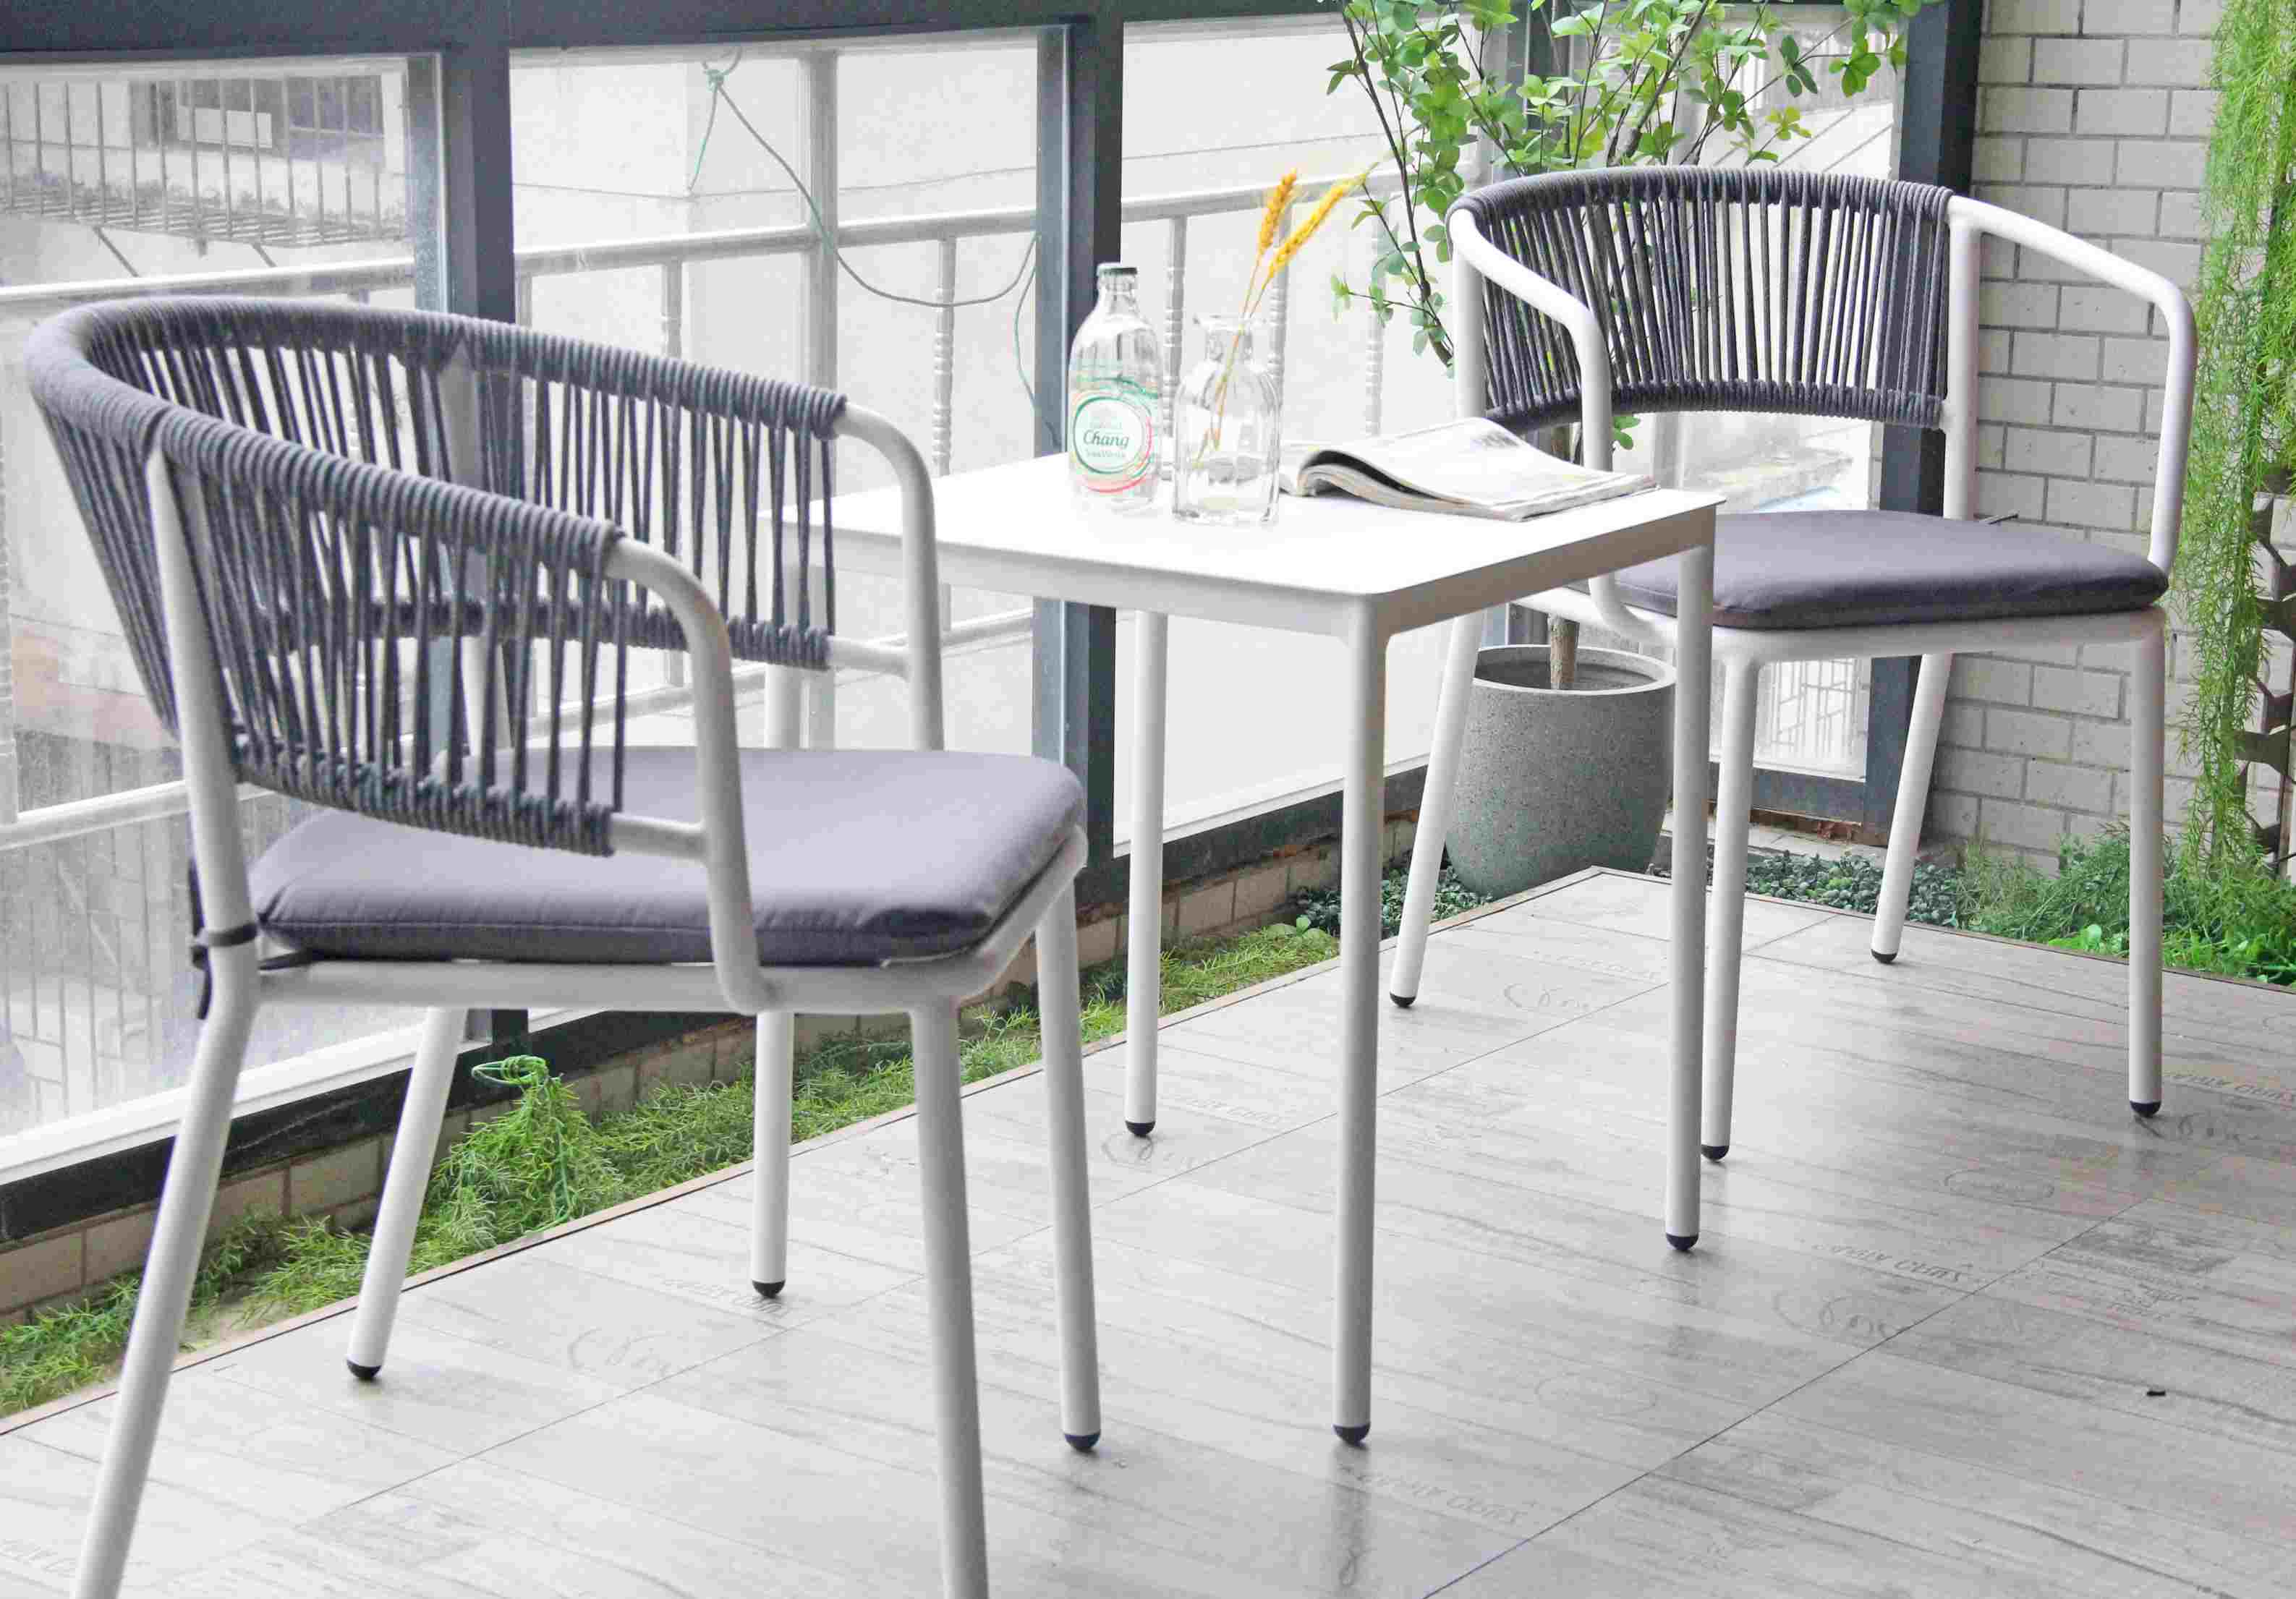 Leisure Rattan Chairs And Table